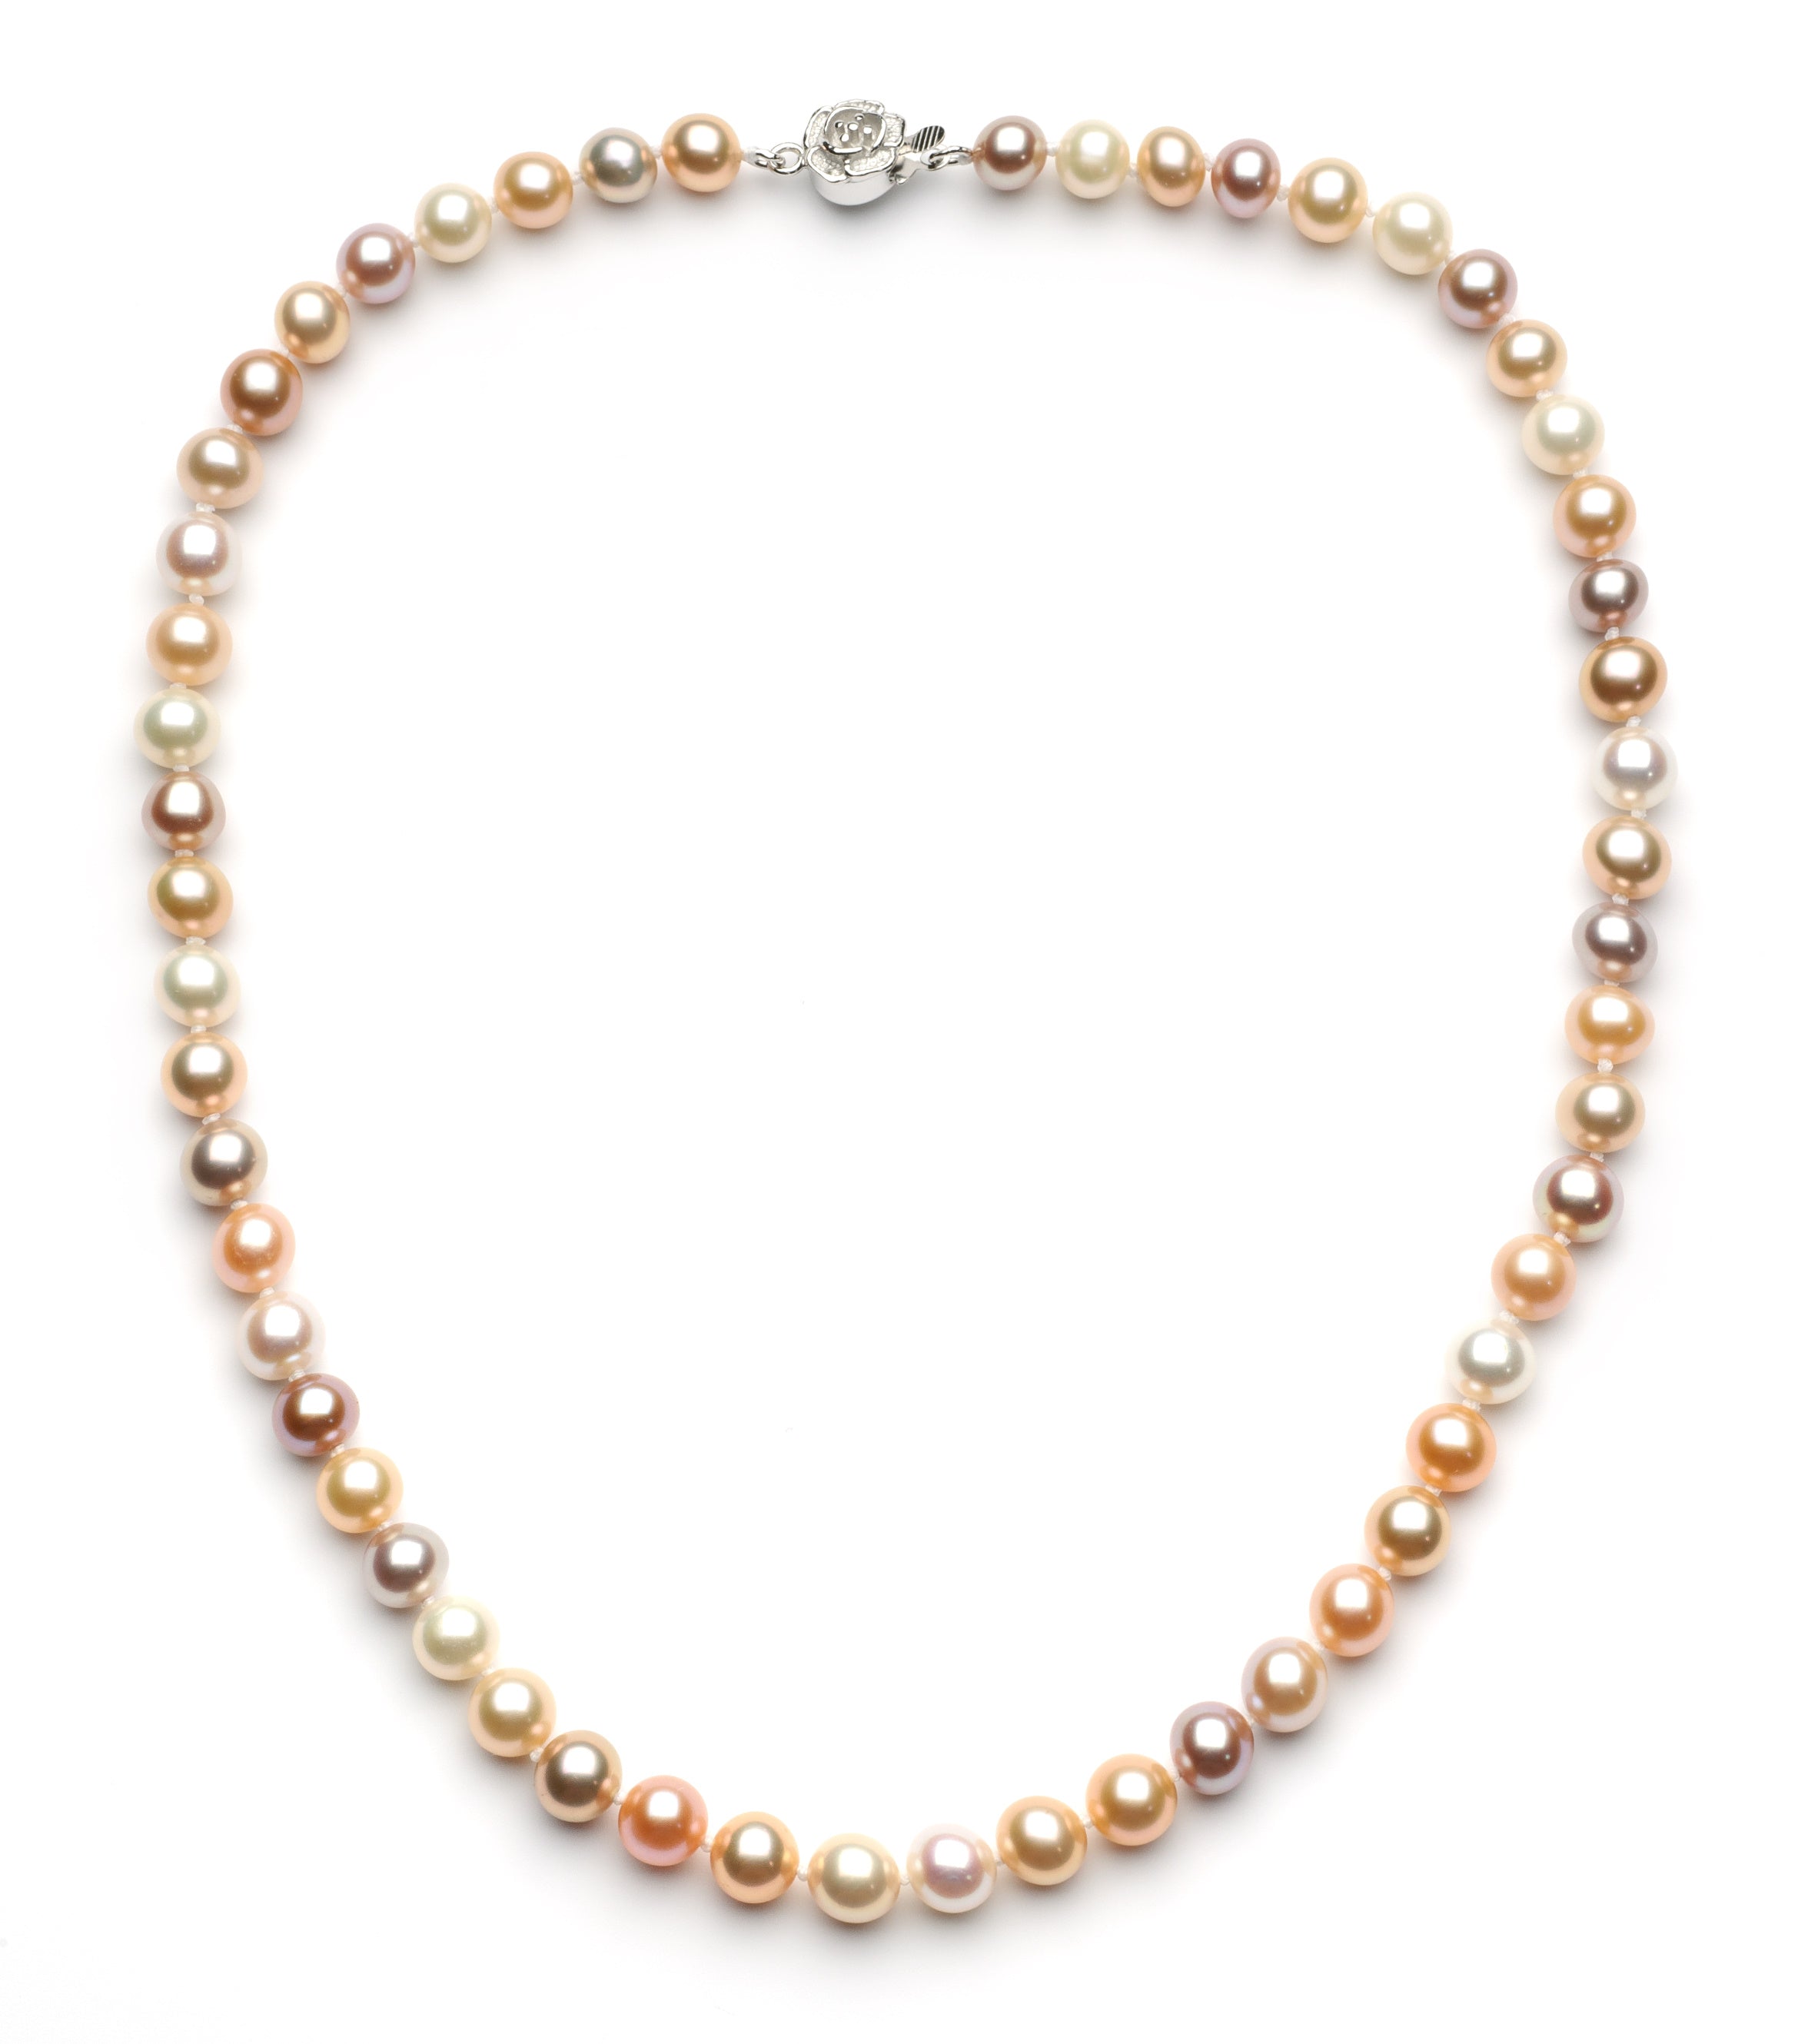 7-8 mm aaa certified multi-colored freshwater pearl necklace with silver or  gold clasp – Dragon King Pearls